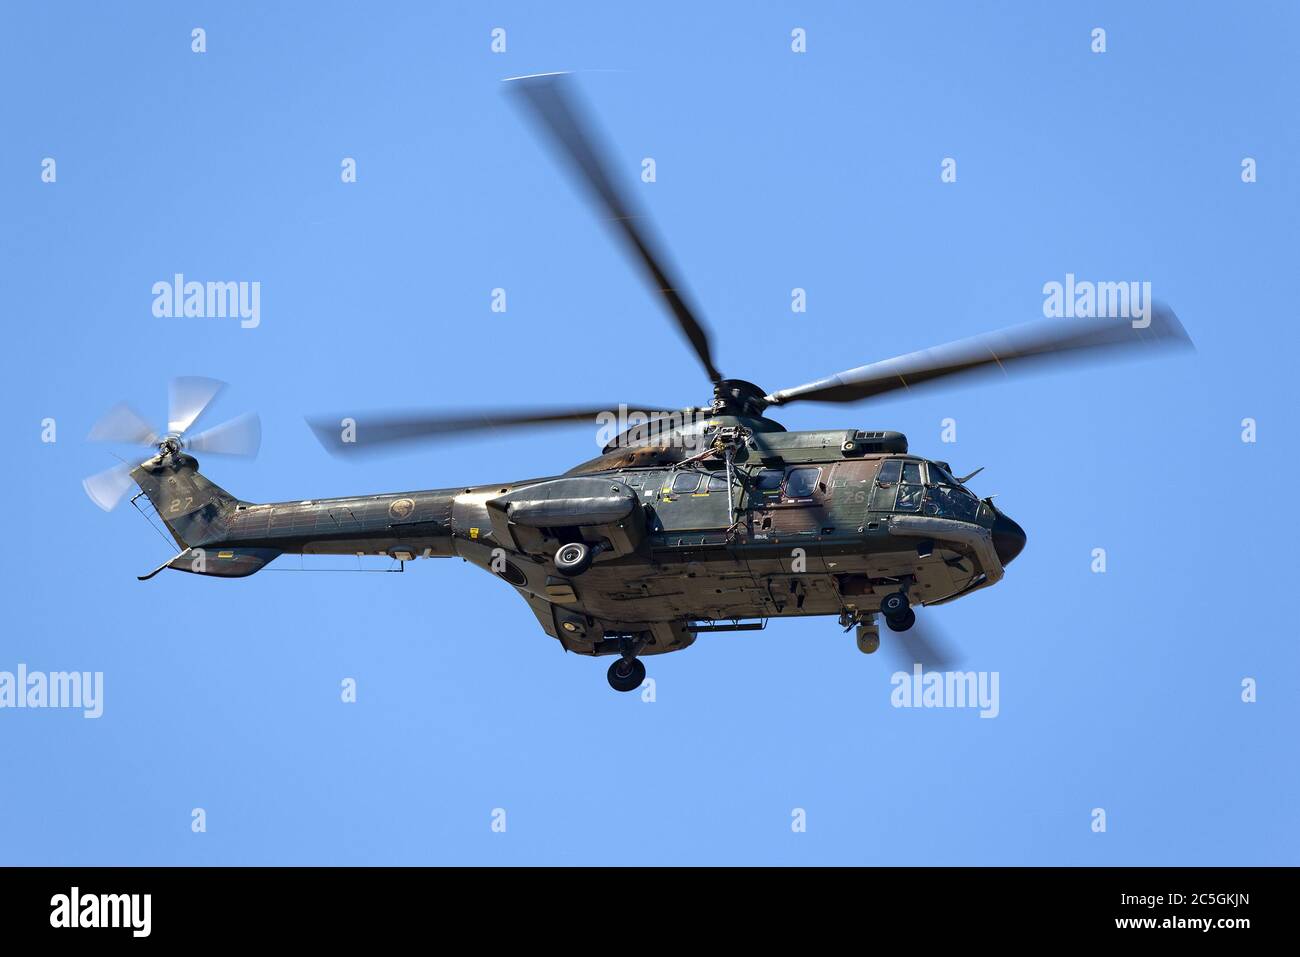 Republic of Singapore Air Force Aerospatiale AS-332 Super Puma military helicopter. Stock Photo